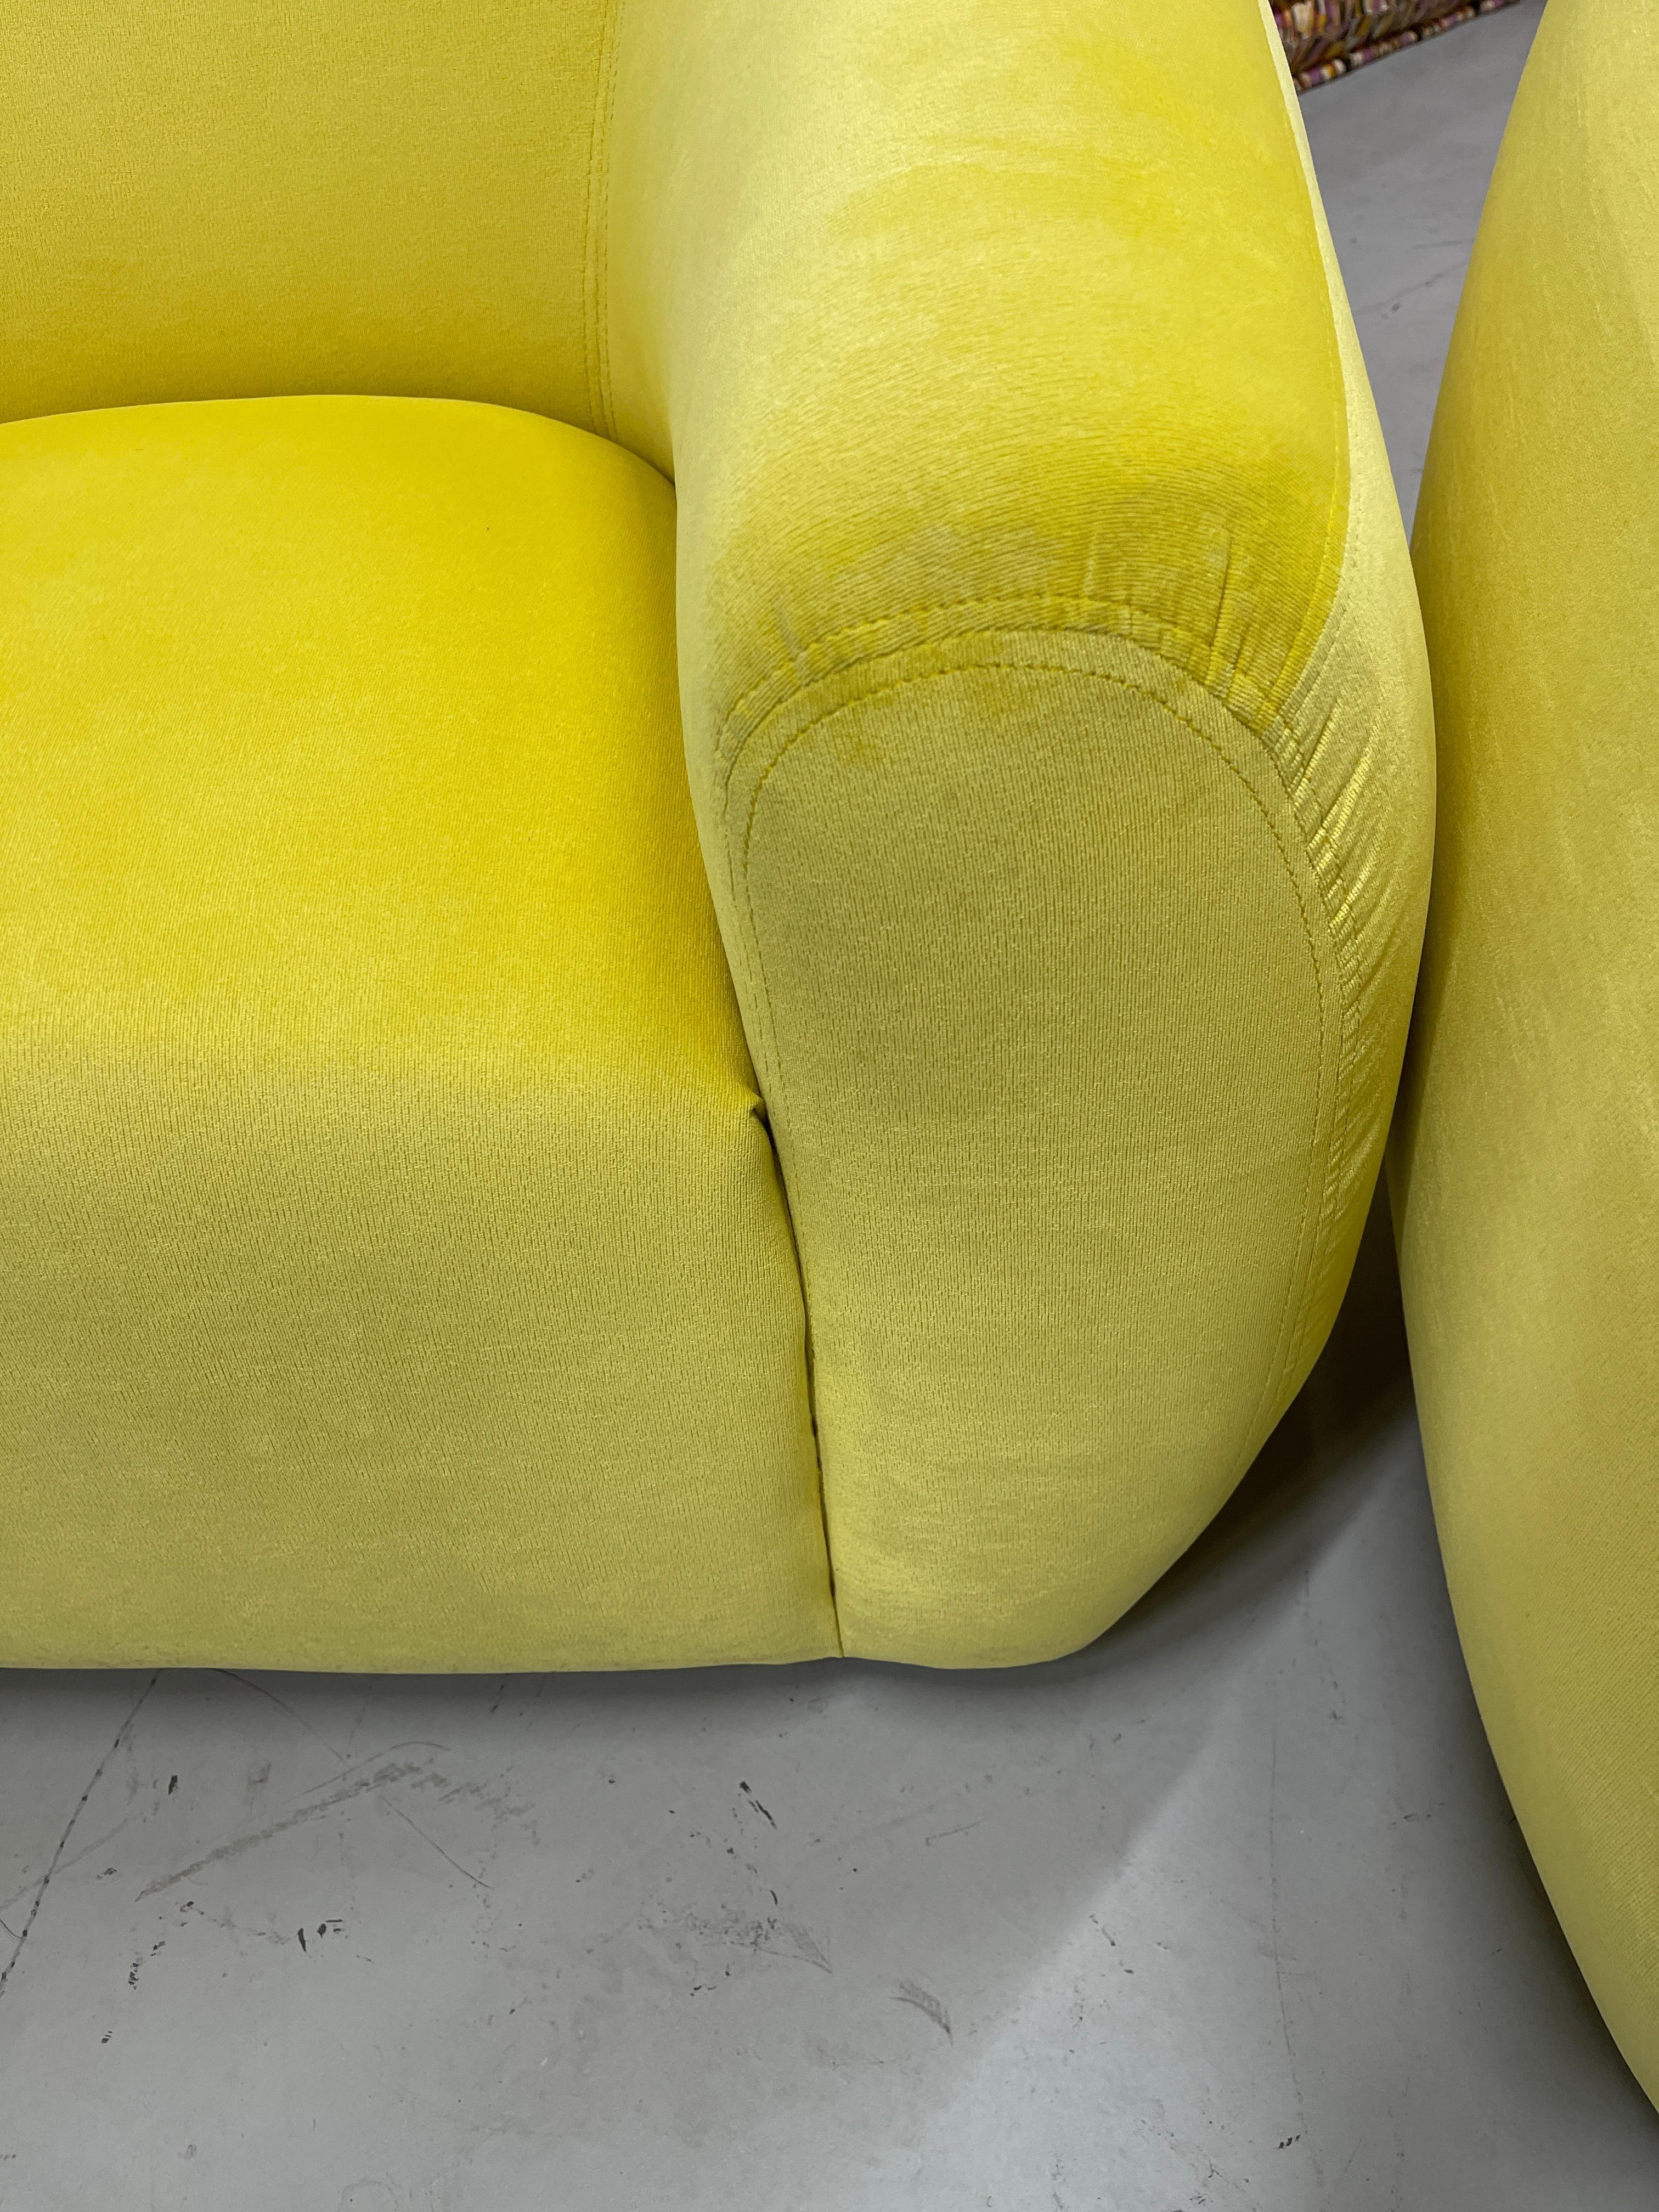 A Rudin Swivel Chairs in Limon Kravet Fabric 4